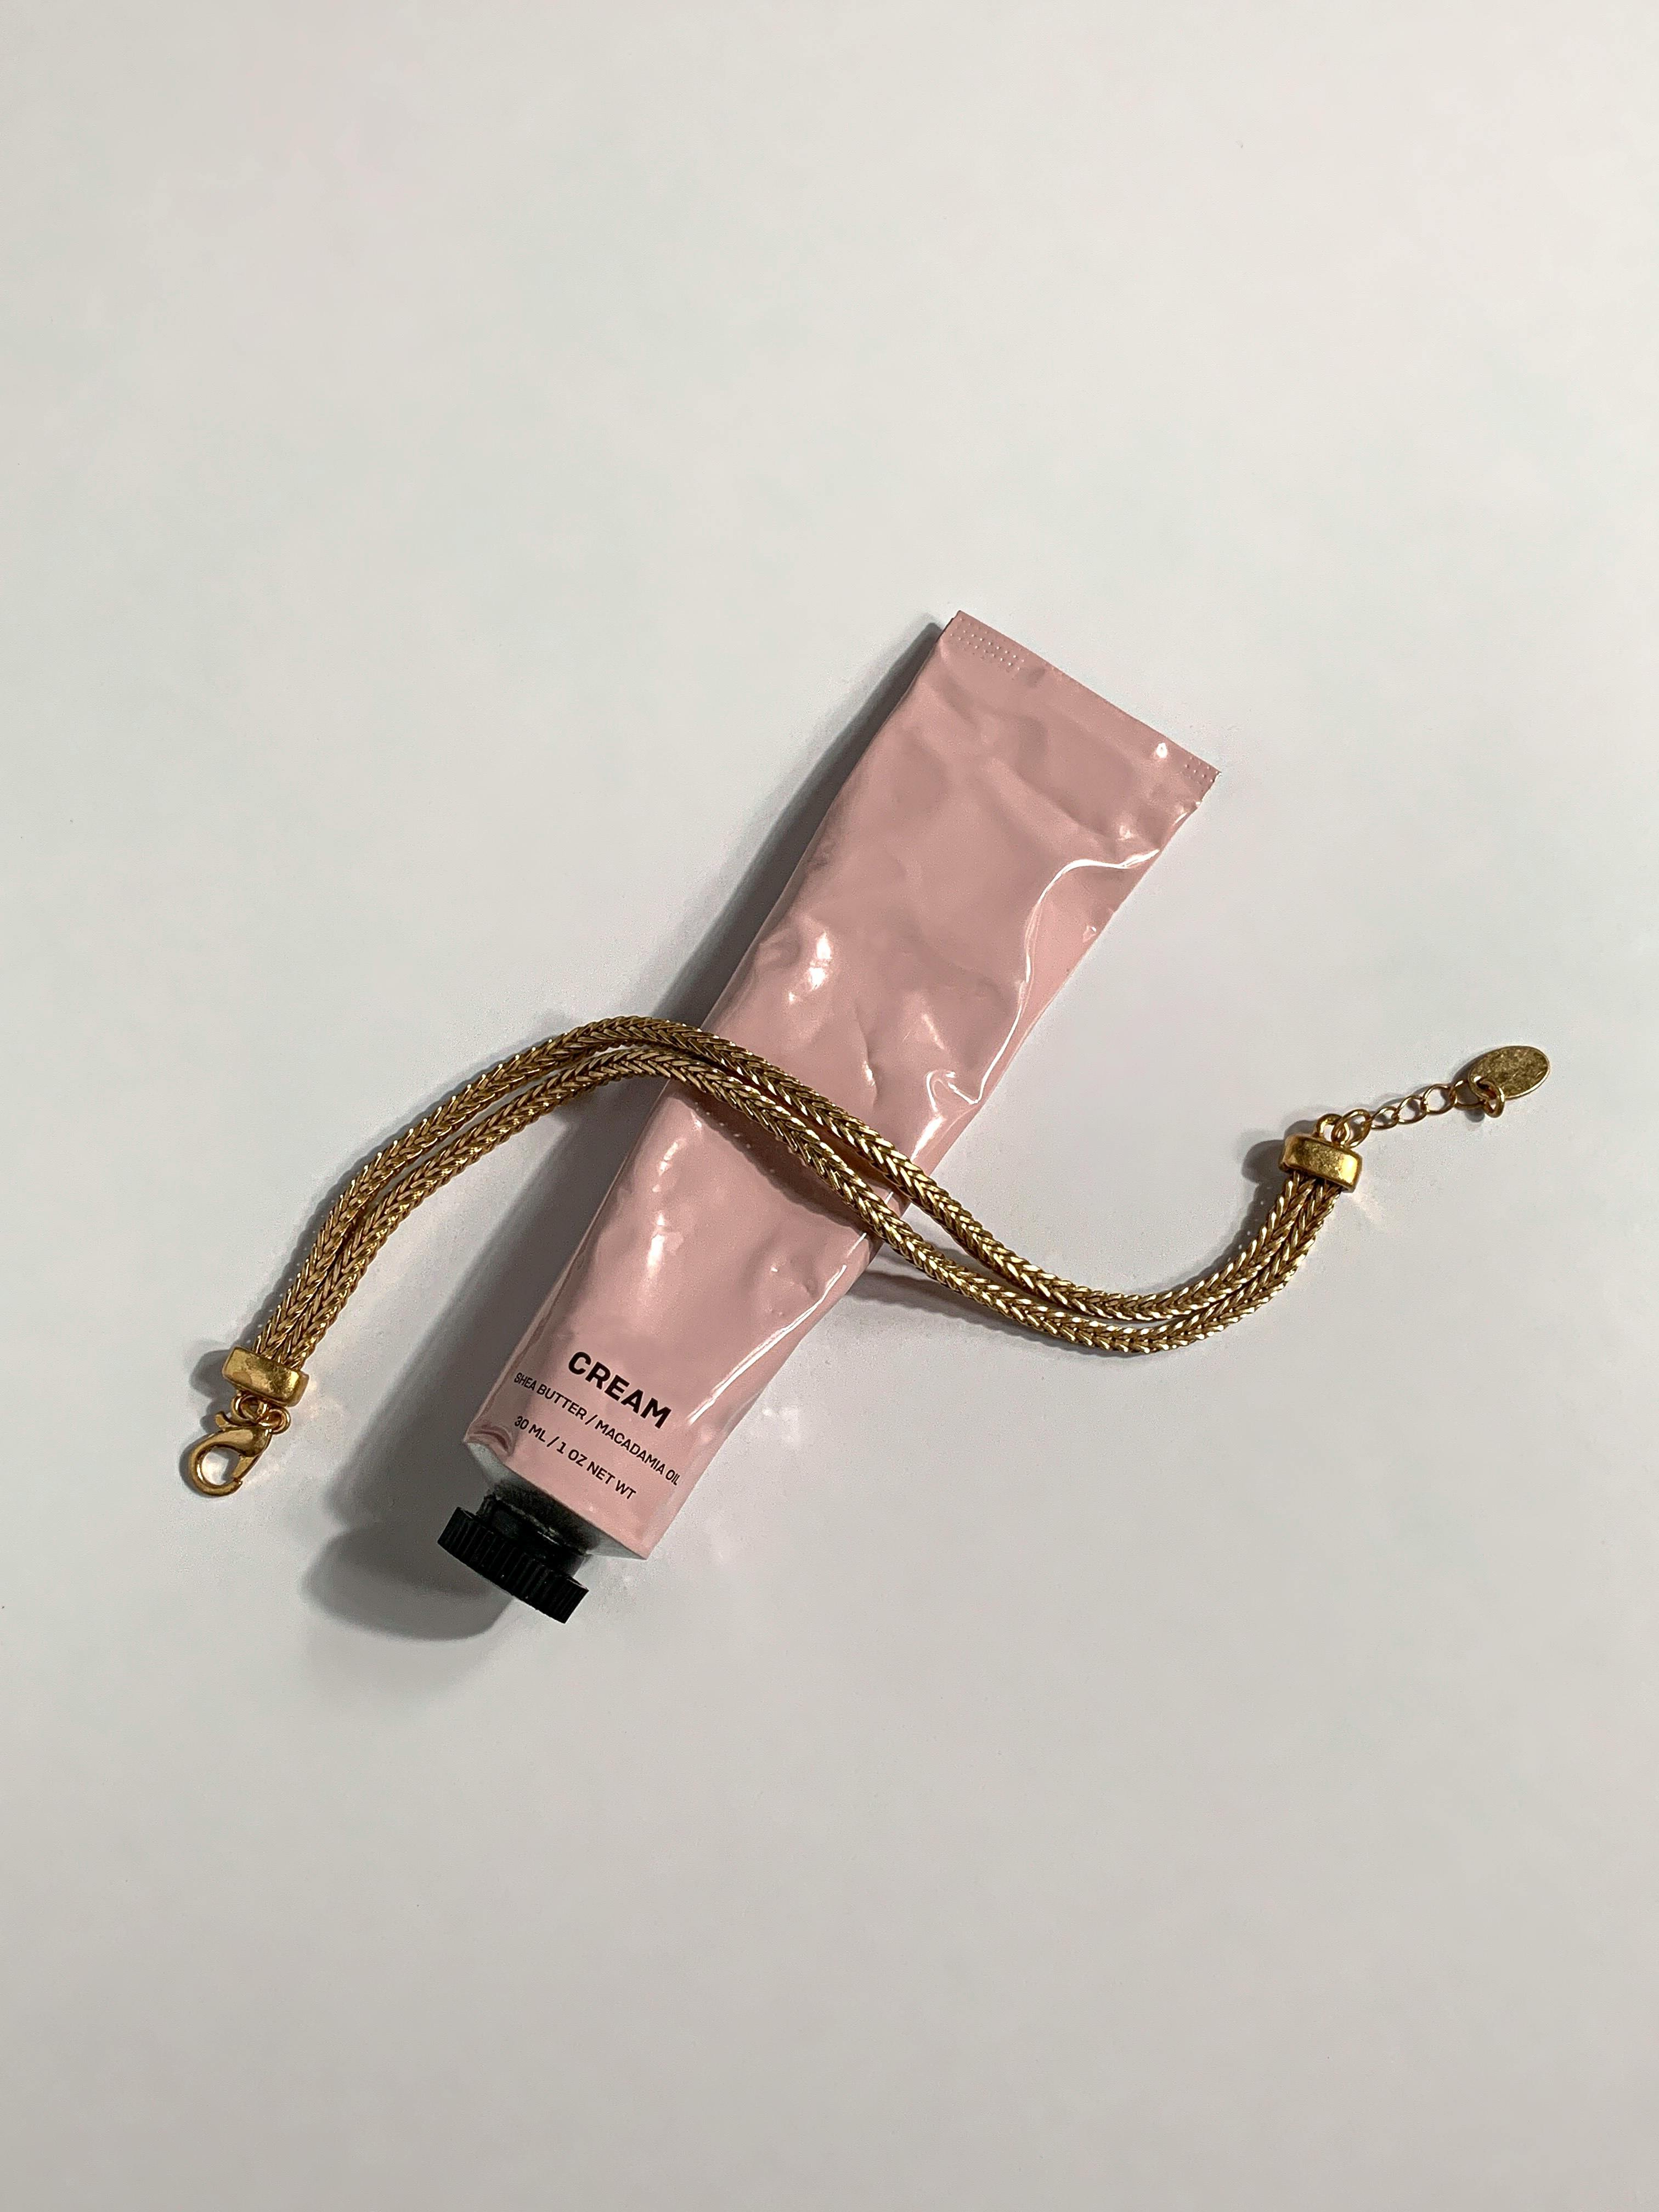 gold bracelet a pink tube container on a white surface